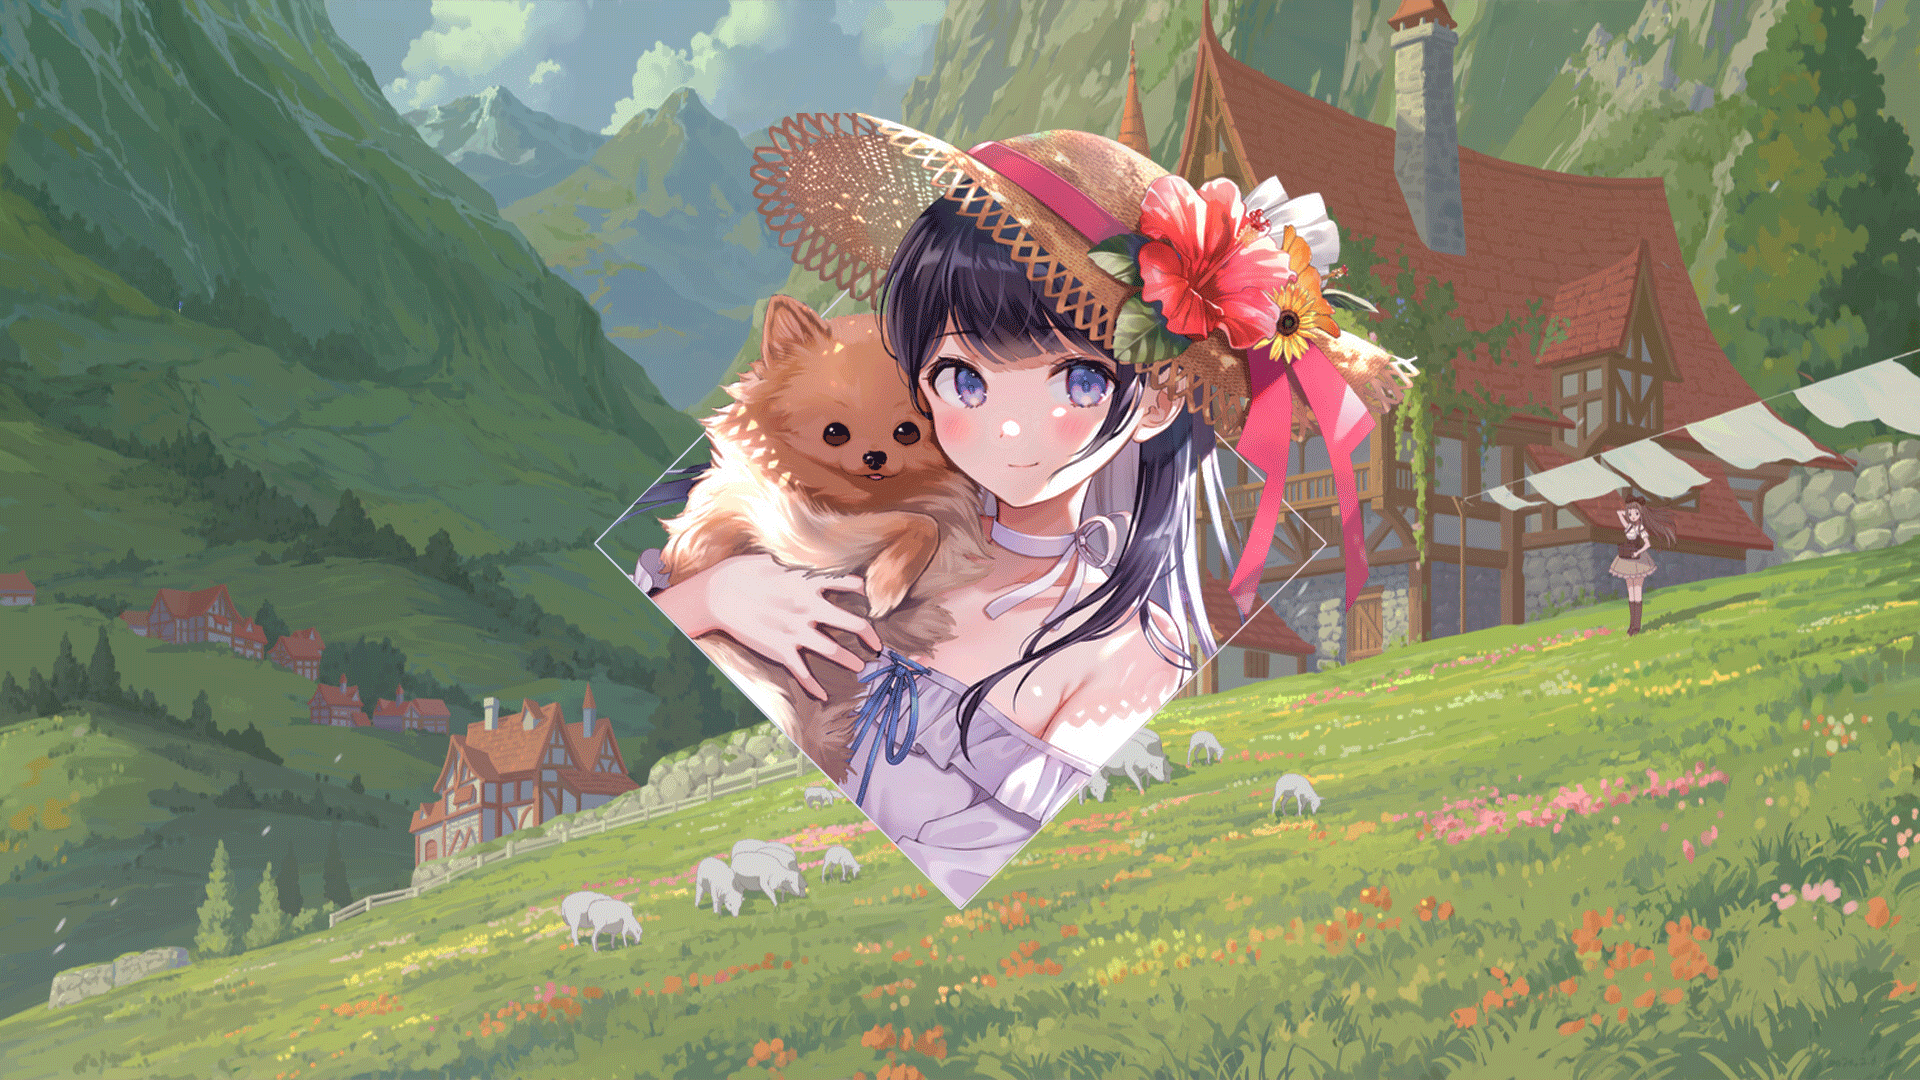 Anime 1920x1080 anime anime girls landscape picture-in-picture camp puppies flowers mountains